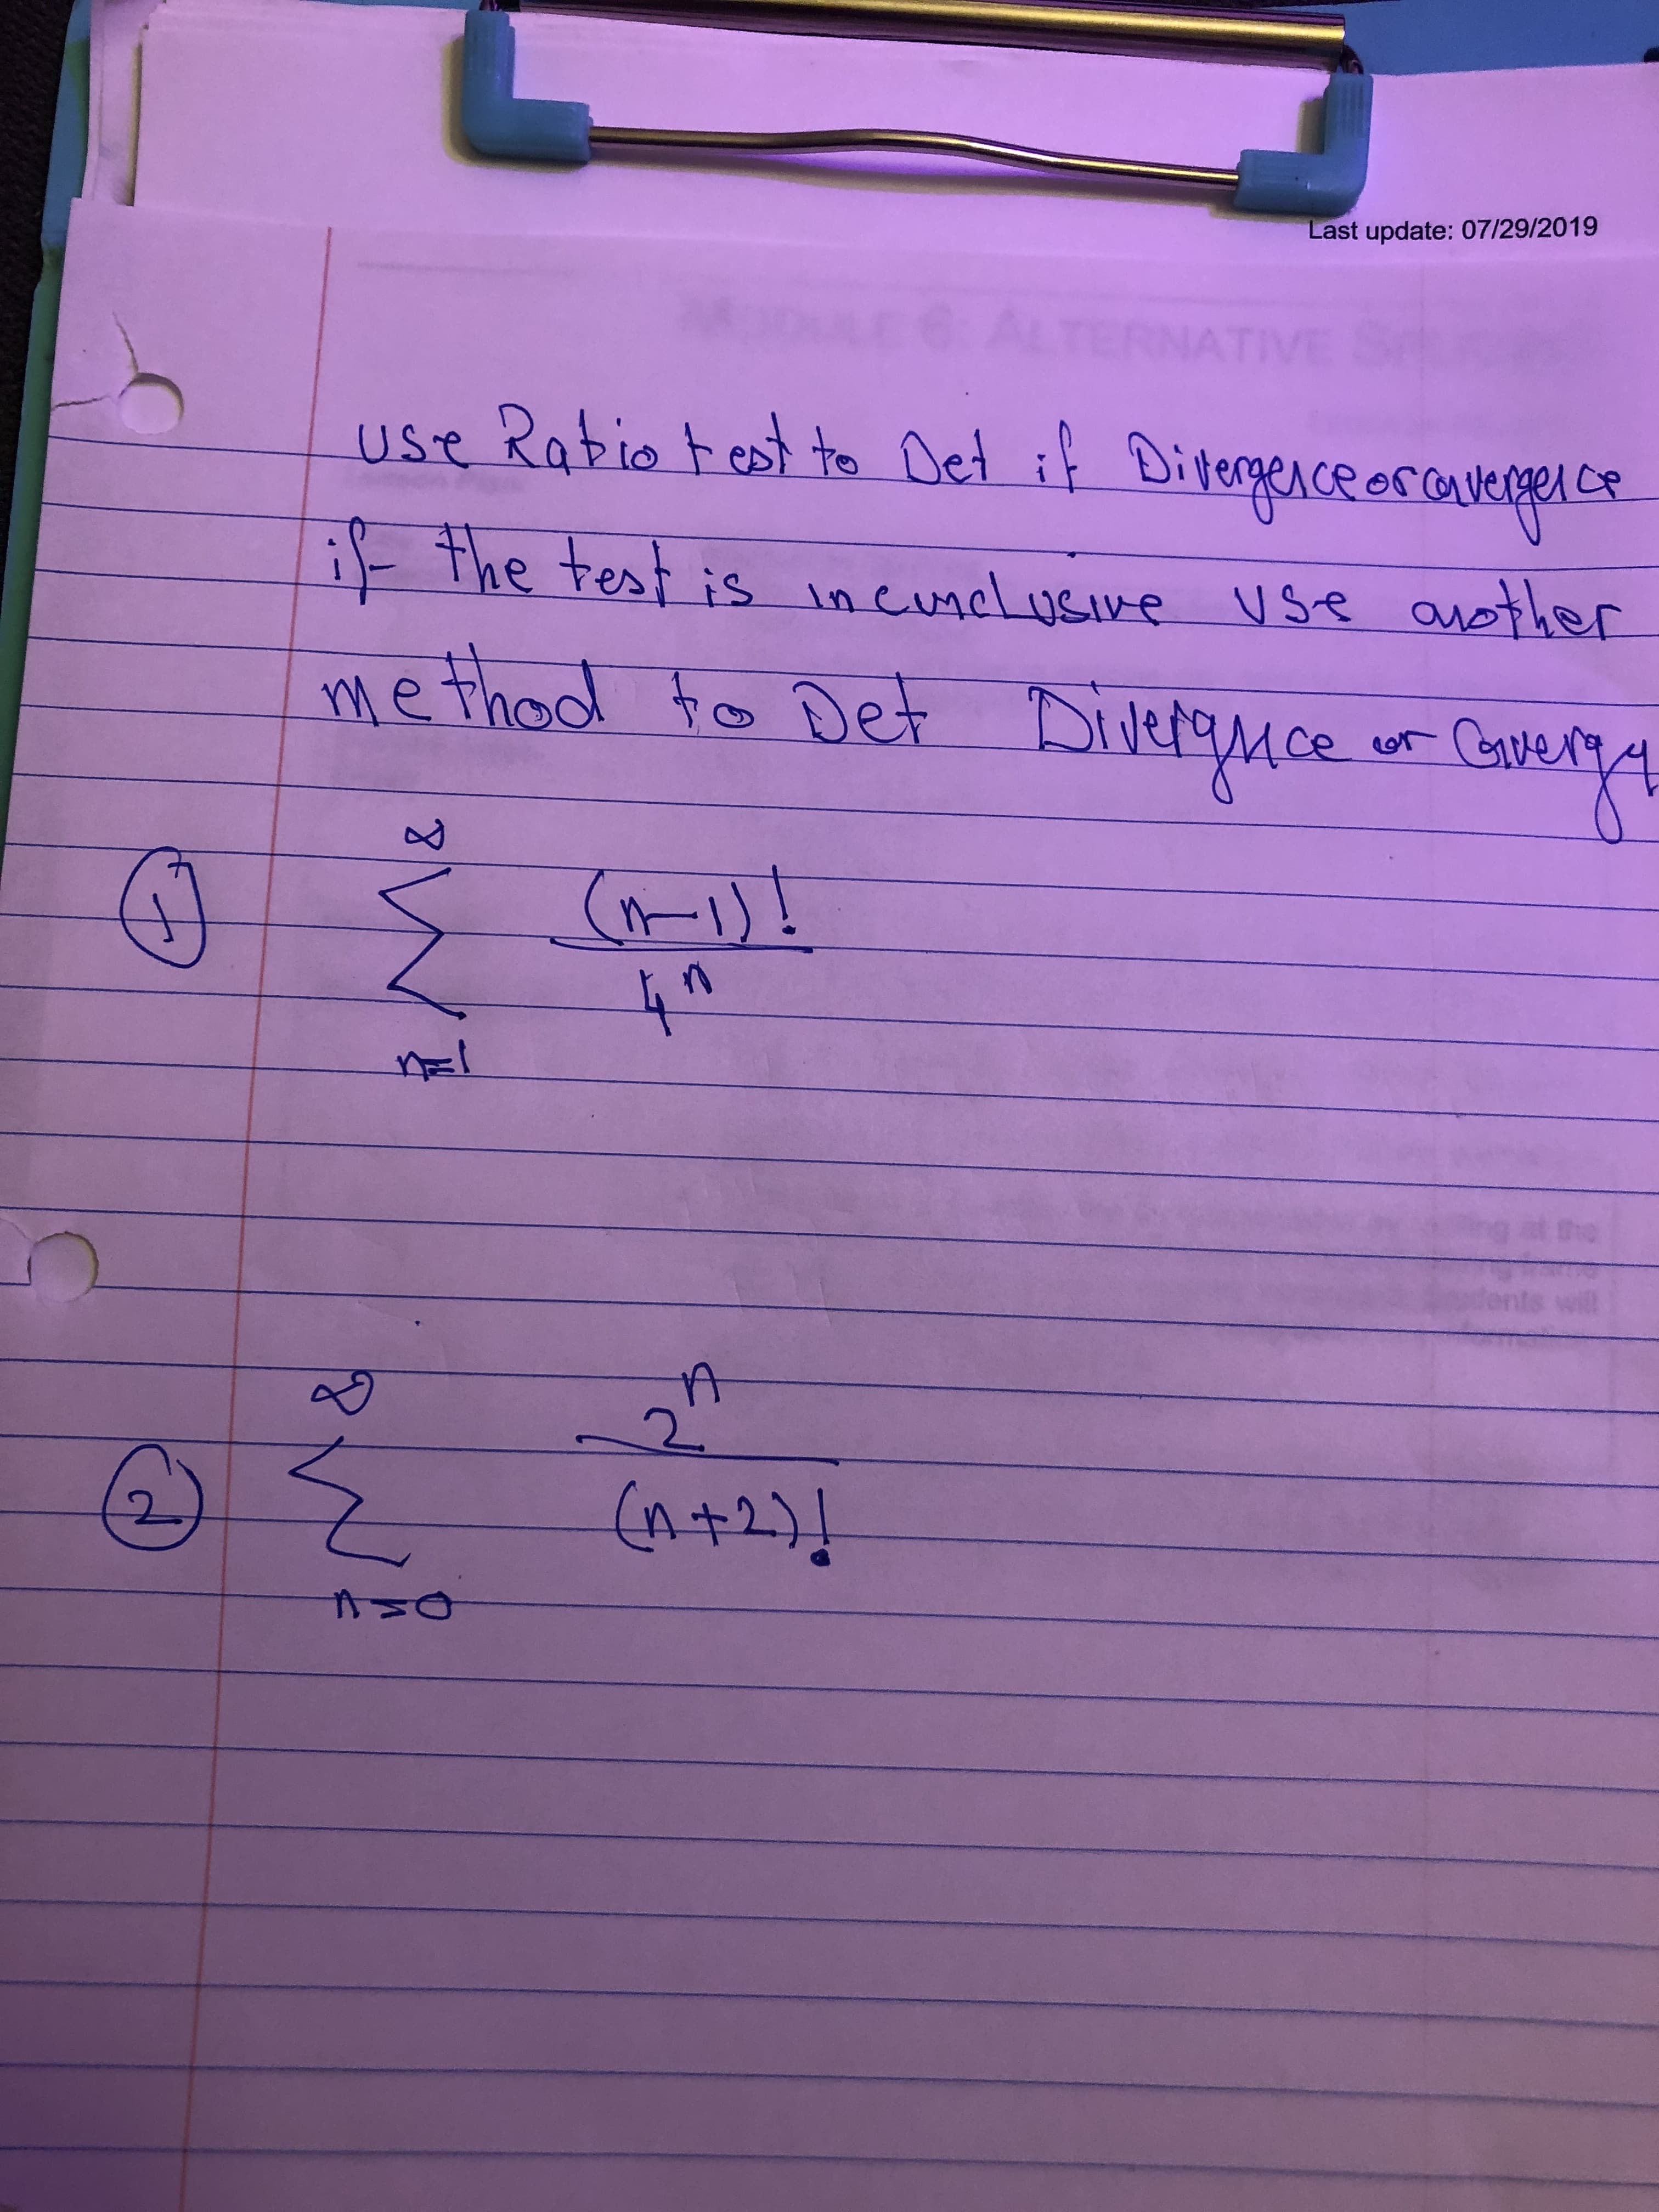 Last update: 07/29/2019
AL
JATIVE
use Rabio tes to Det
t if Dipergenceercavenger.ce
i- The test is ineunelusive use aother
method to Det Diverqmce or Convere
(A-1)!
2.
(A+2)!
